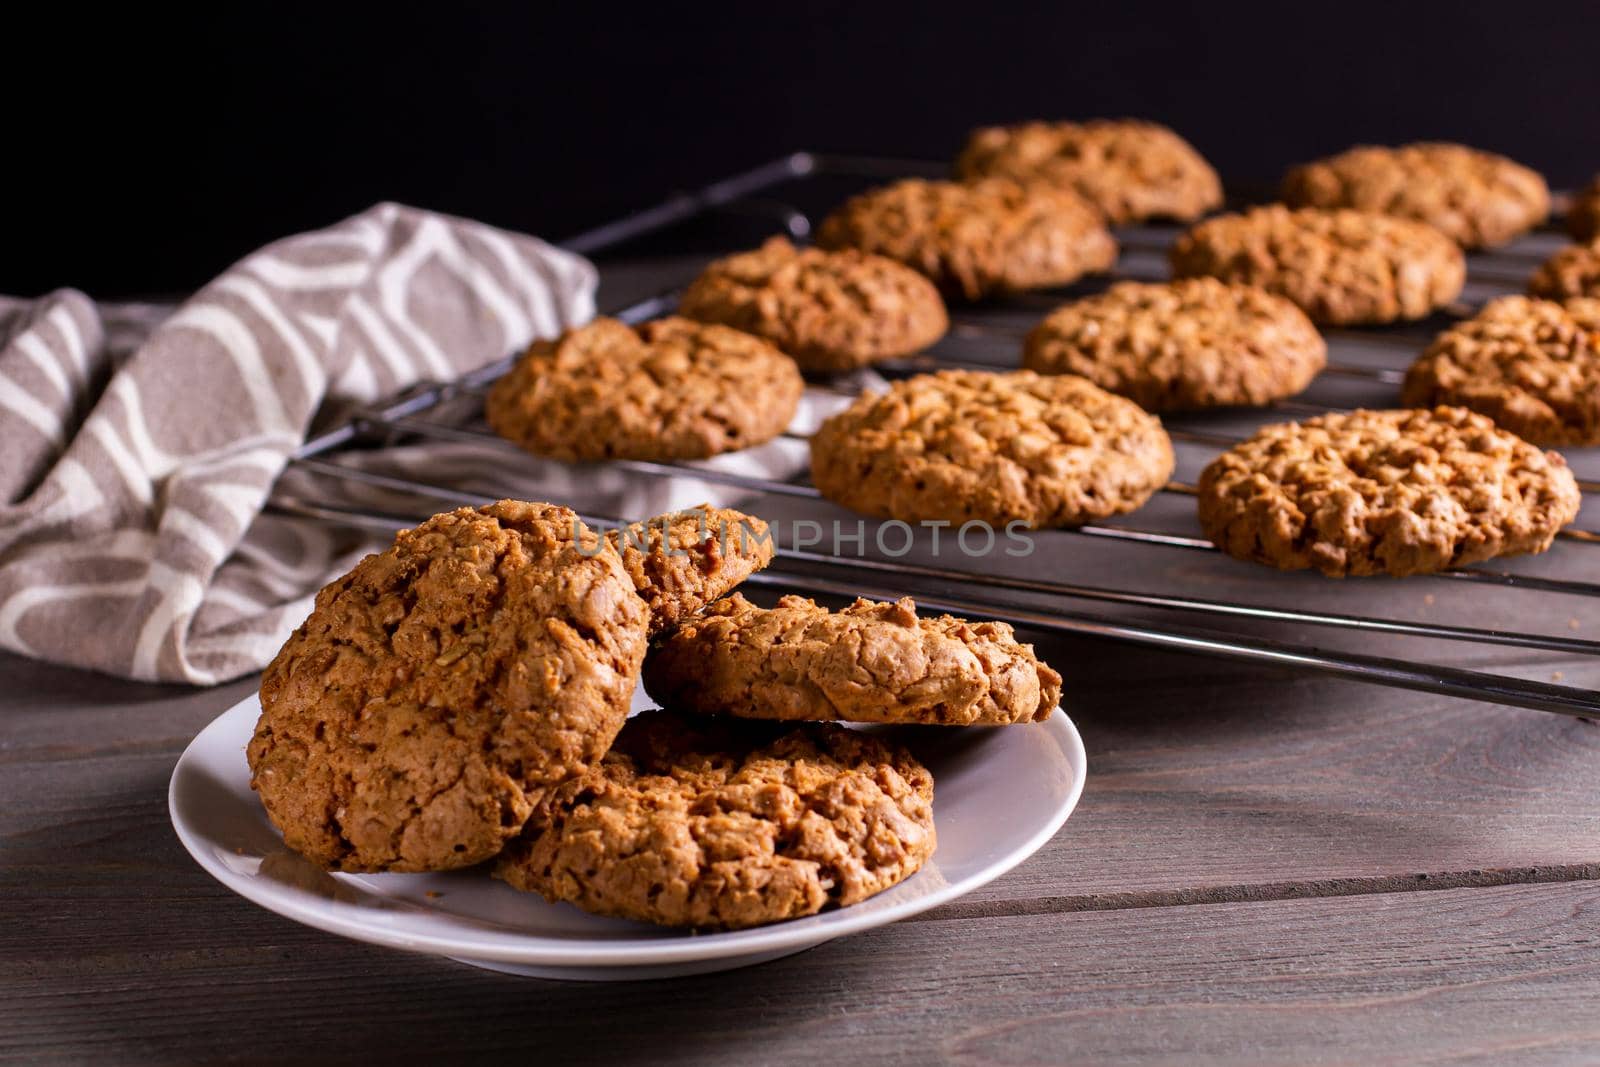 freshly baked warm oatmeal cookies on a cooling stand and saucer on a dark background.